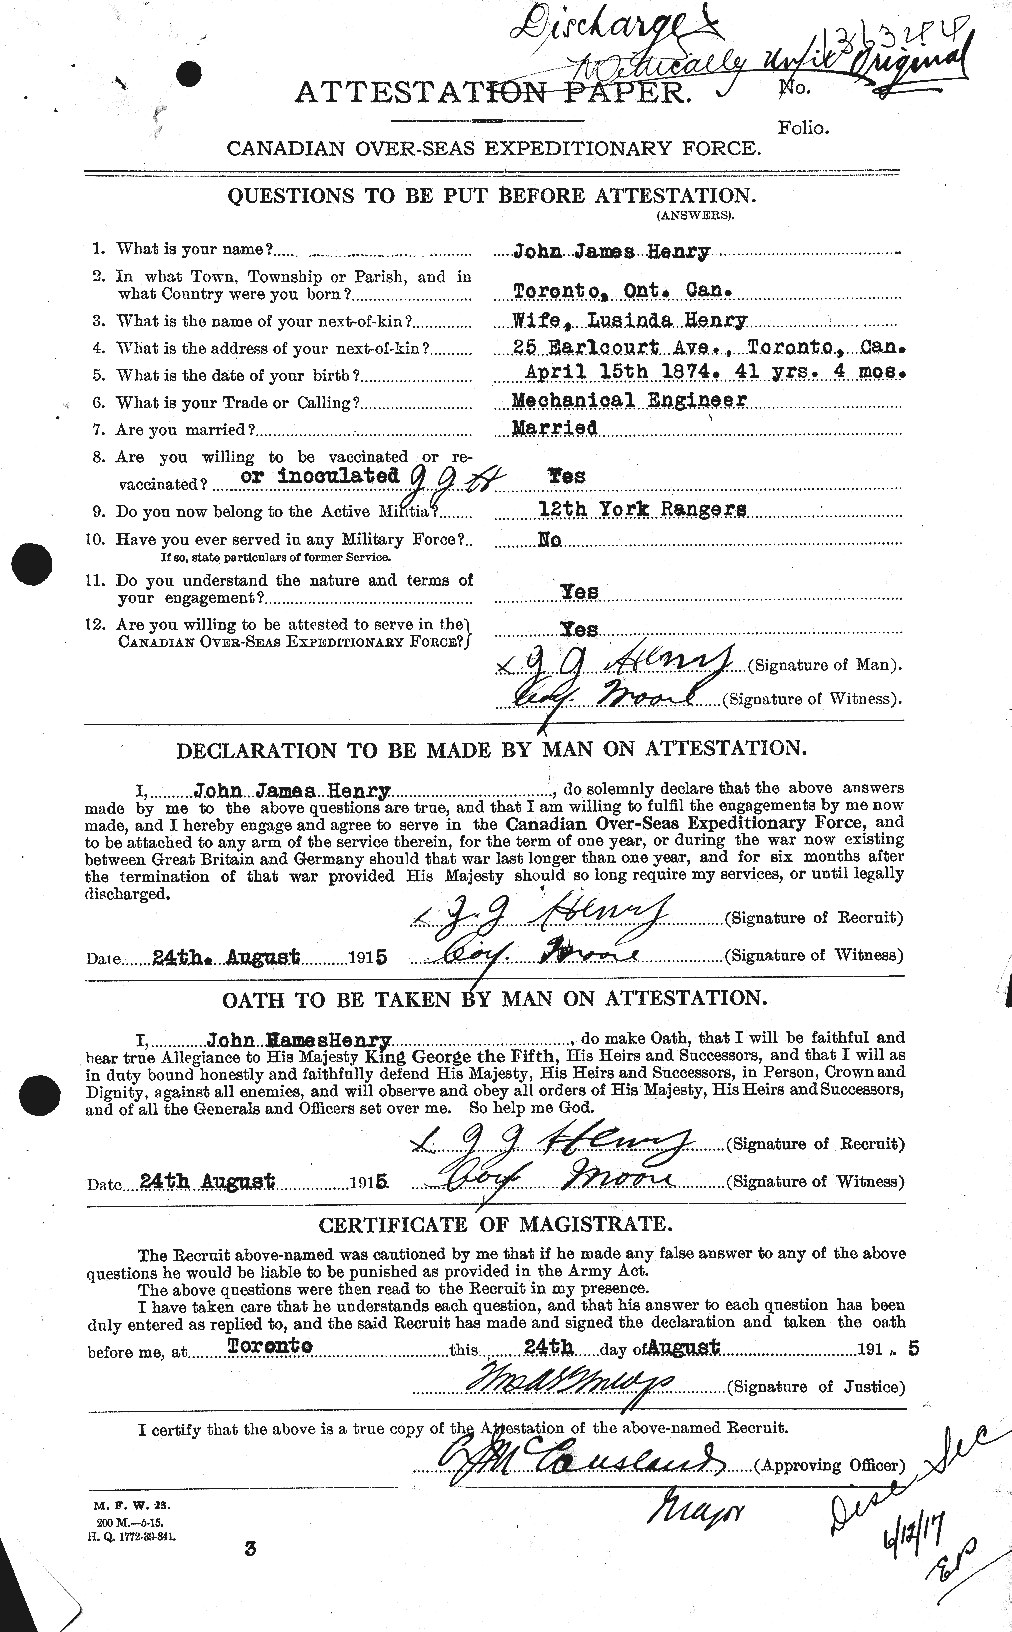 Personnel Records of the First World War - CEF 387624a